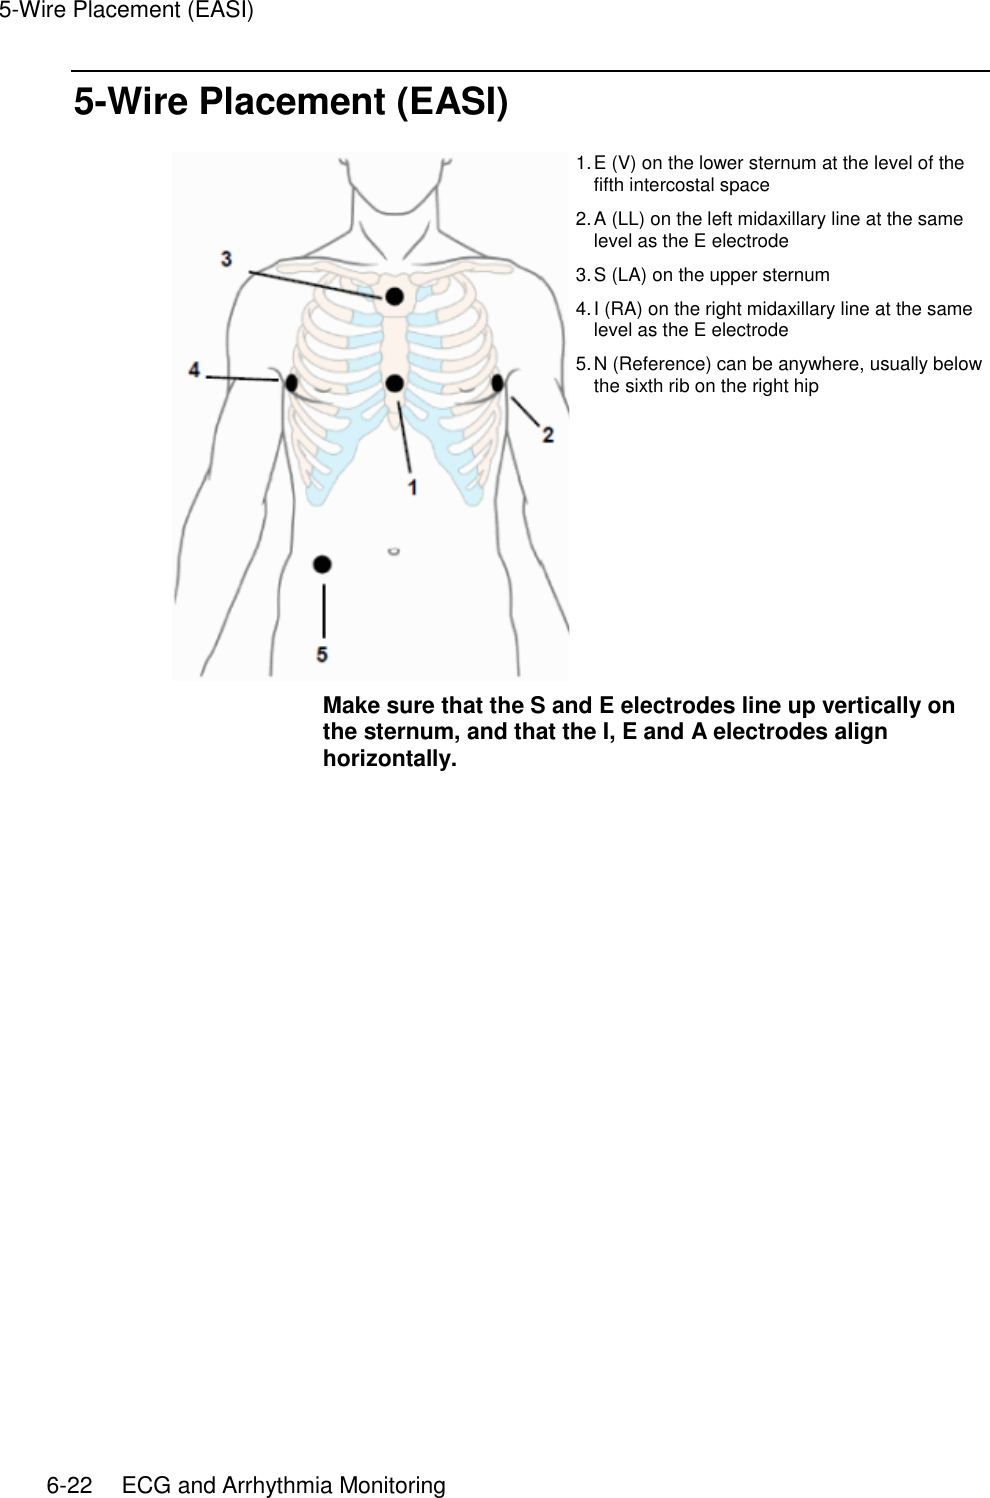 5-Wire Placement (EASI)   6-22    ECG and Arrhythmia Monitoring 5-Wire Placement (EASI)  1. E (V) on the lower sternum at the level of the fifth intercostal space 2. A (LL) on the left midaxillary line at the same level as the E electrode 3. S (LA) on the upper sternum 4. I (RA) on the right midaxillary line at the same level as the E electrode 5. N (Reference) can be anywhere, usually below the sixth rib on the right hip Make sure that the S and E electrodes line up vertically on the sternum, and that the I, E and A electrodes align horizontally.   